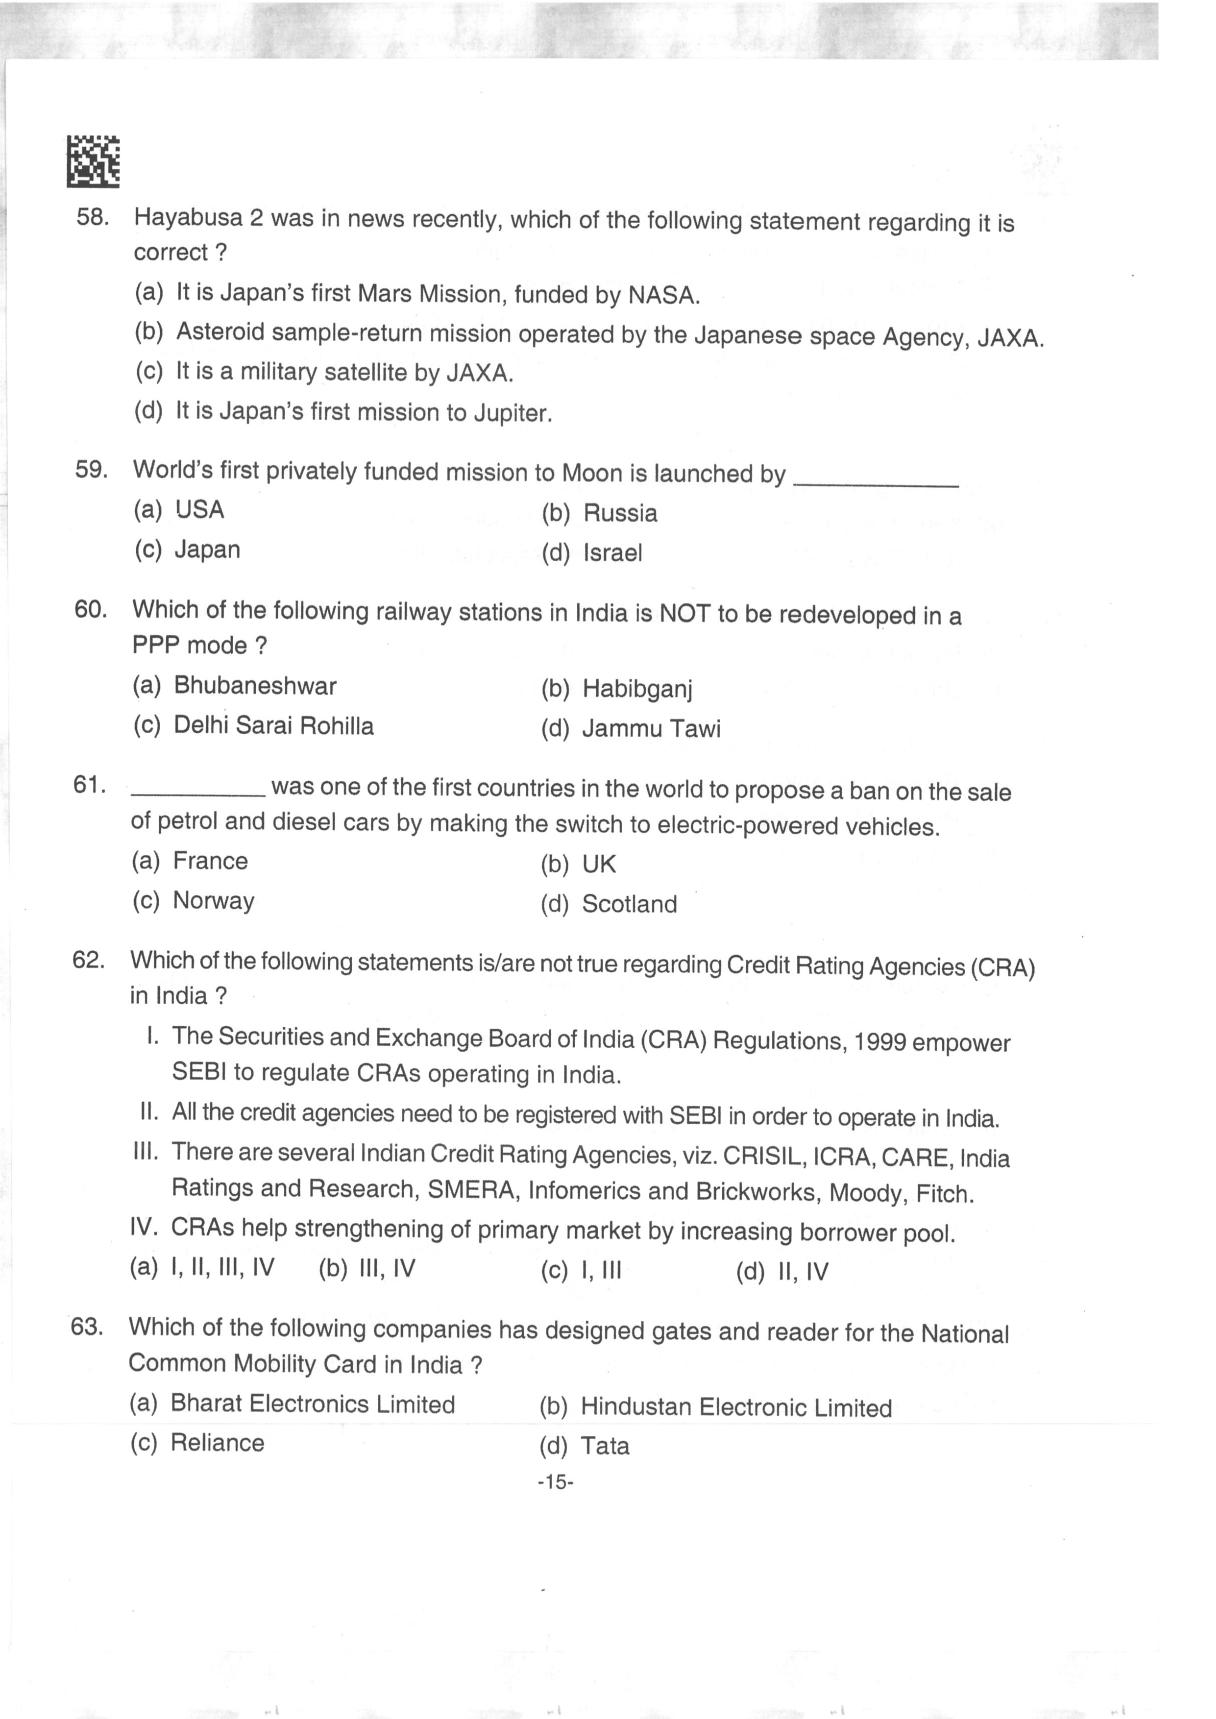 AILET 2019 Question Paper for BA LLB - Page 15